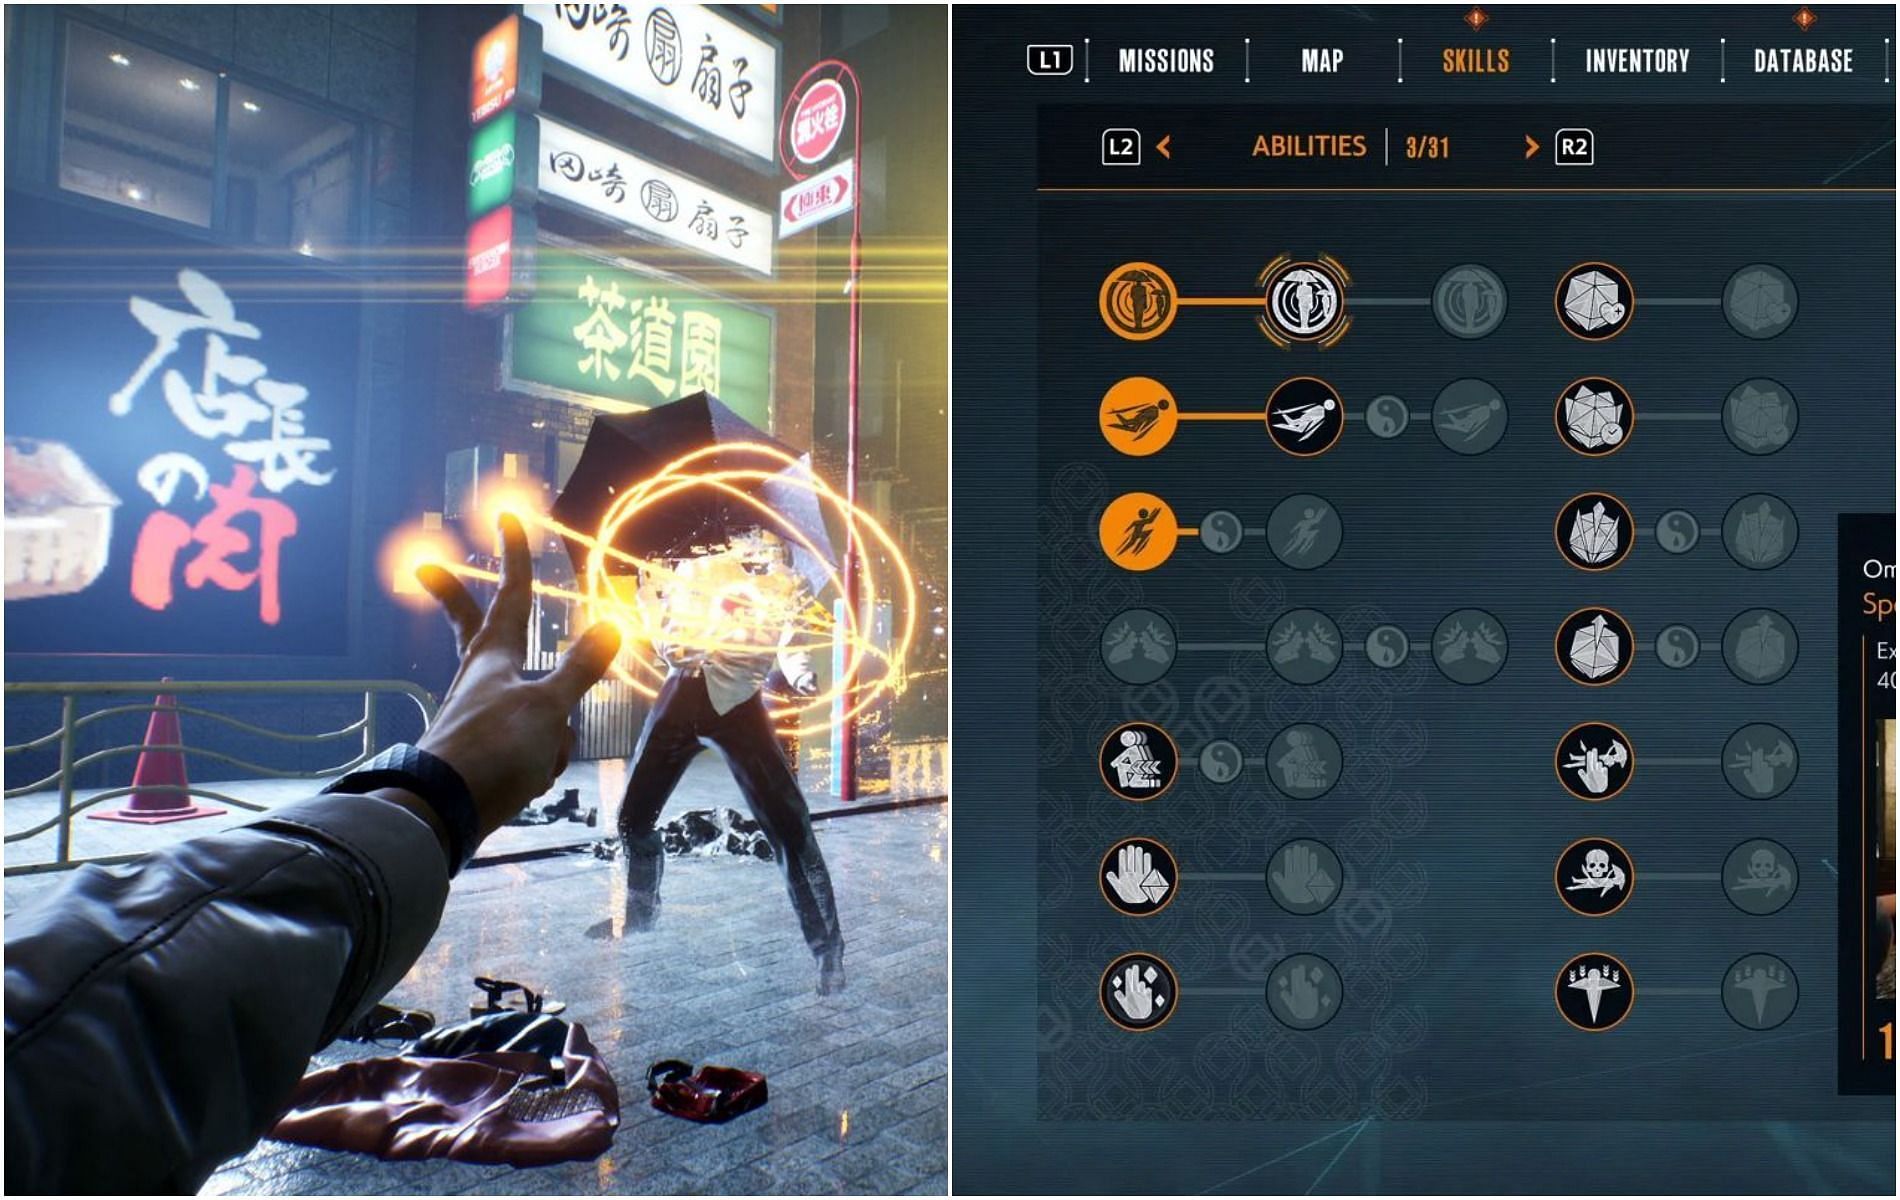 The Abilities Skill Tree in GhostWire Tokyo (Image by Tango GameWorks)